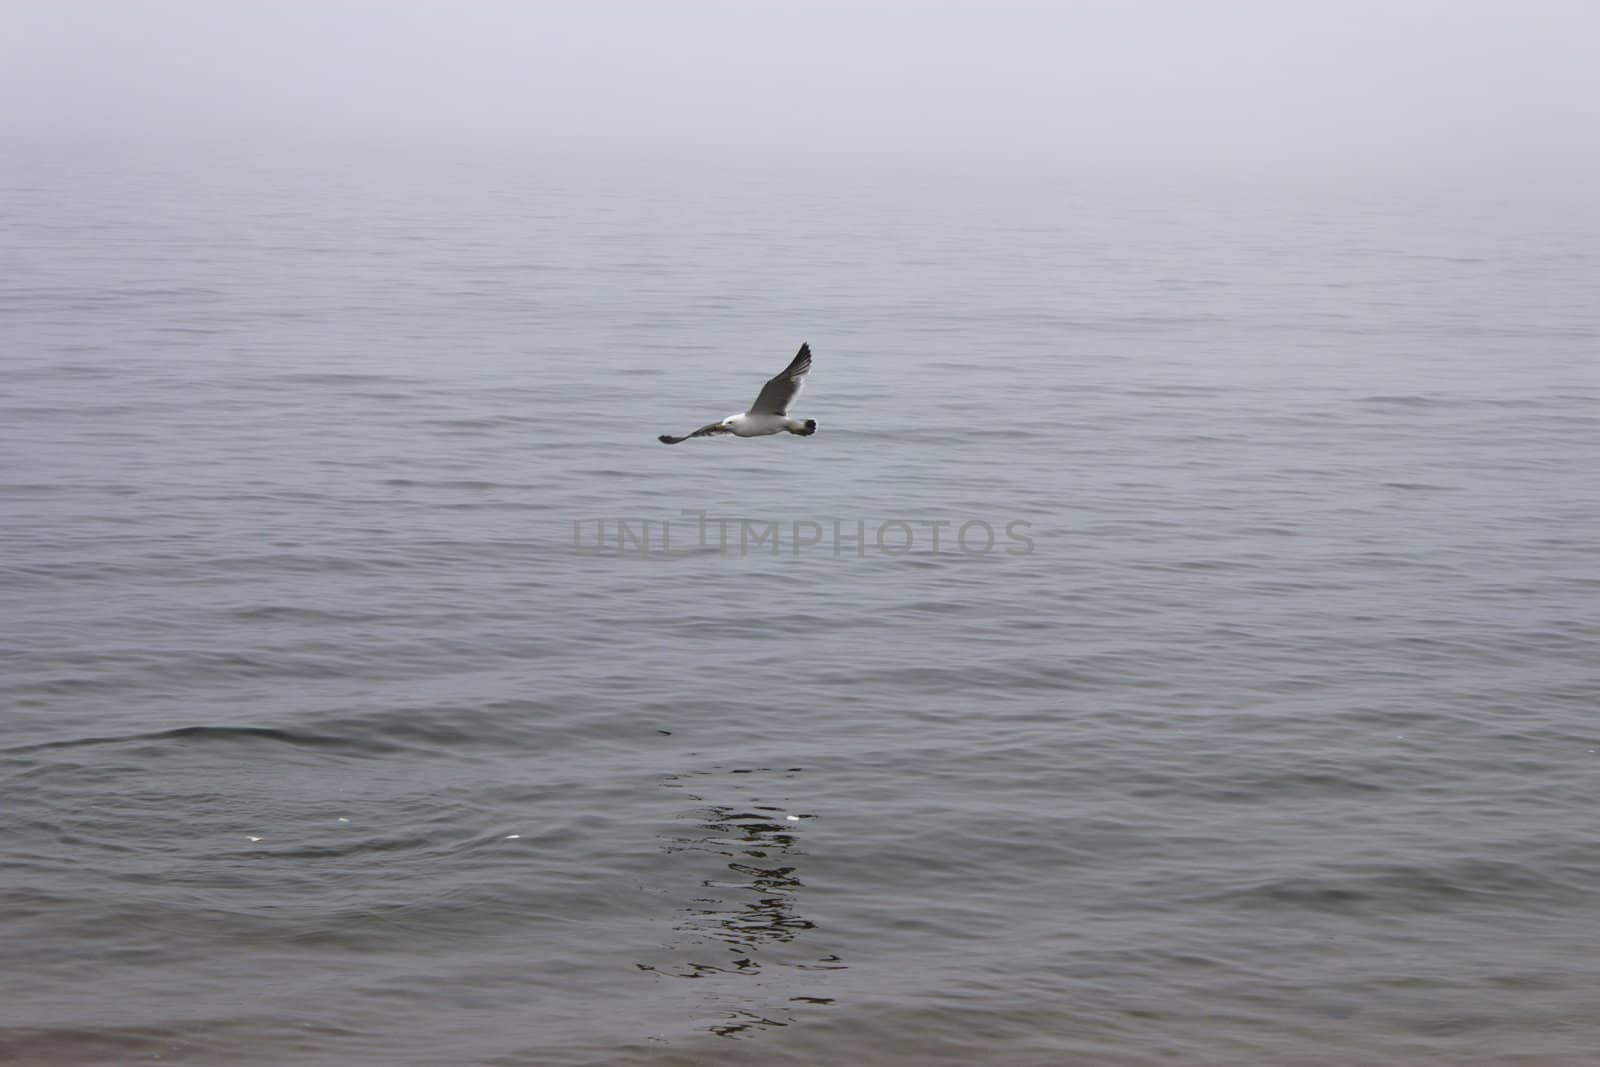 Seagulls in a fog early in the morning